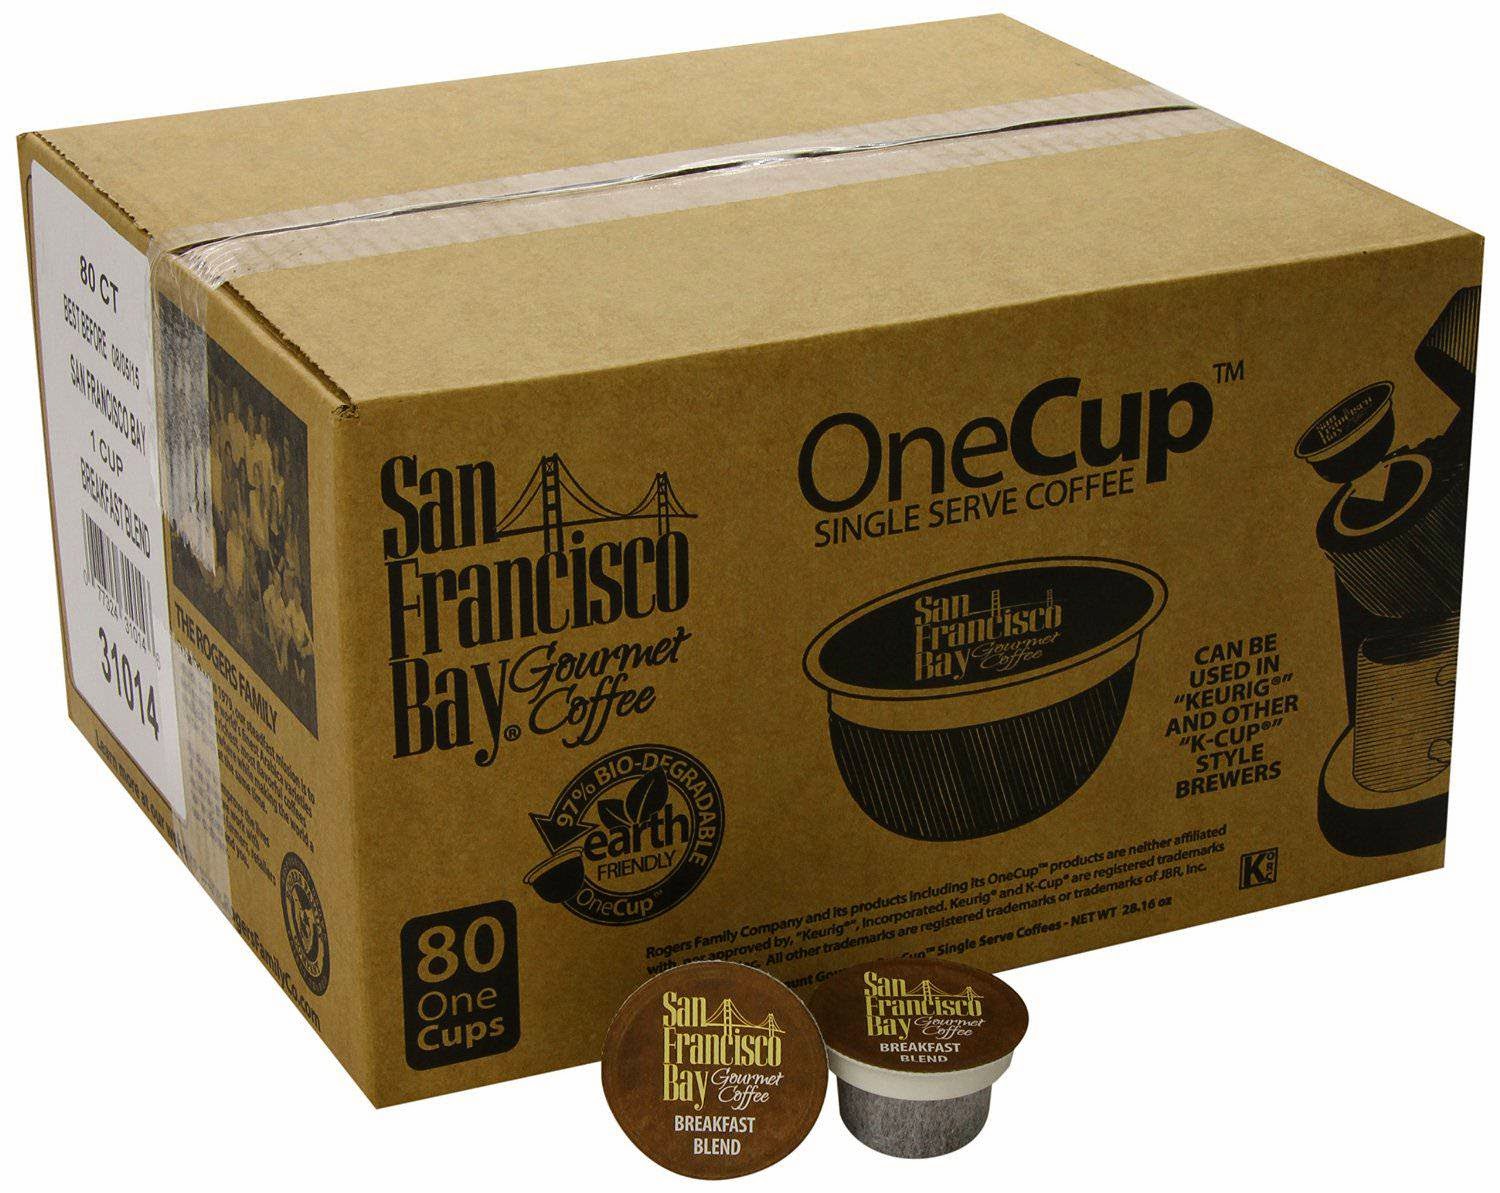 Cheapest San Francisco Bay Coffee, Breakfast Blend, 80 OneCup ...